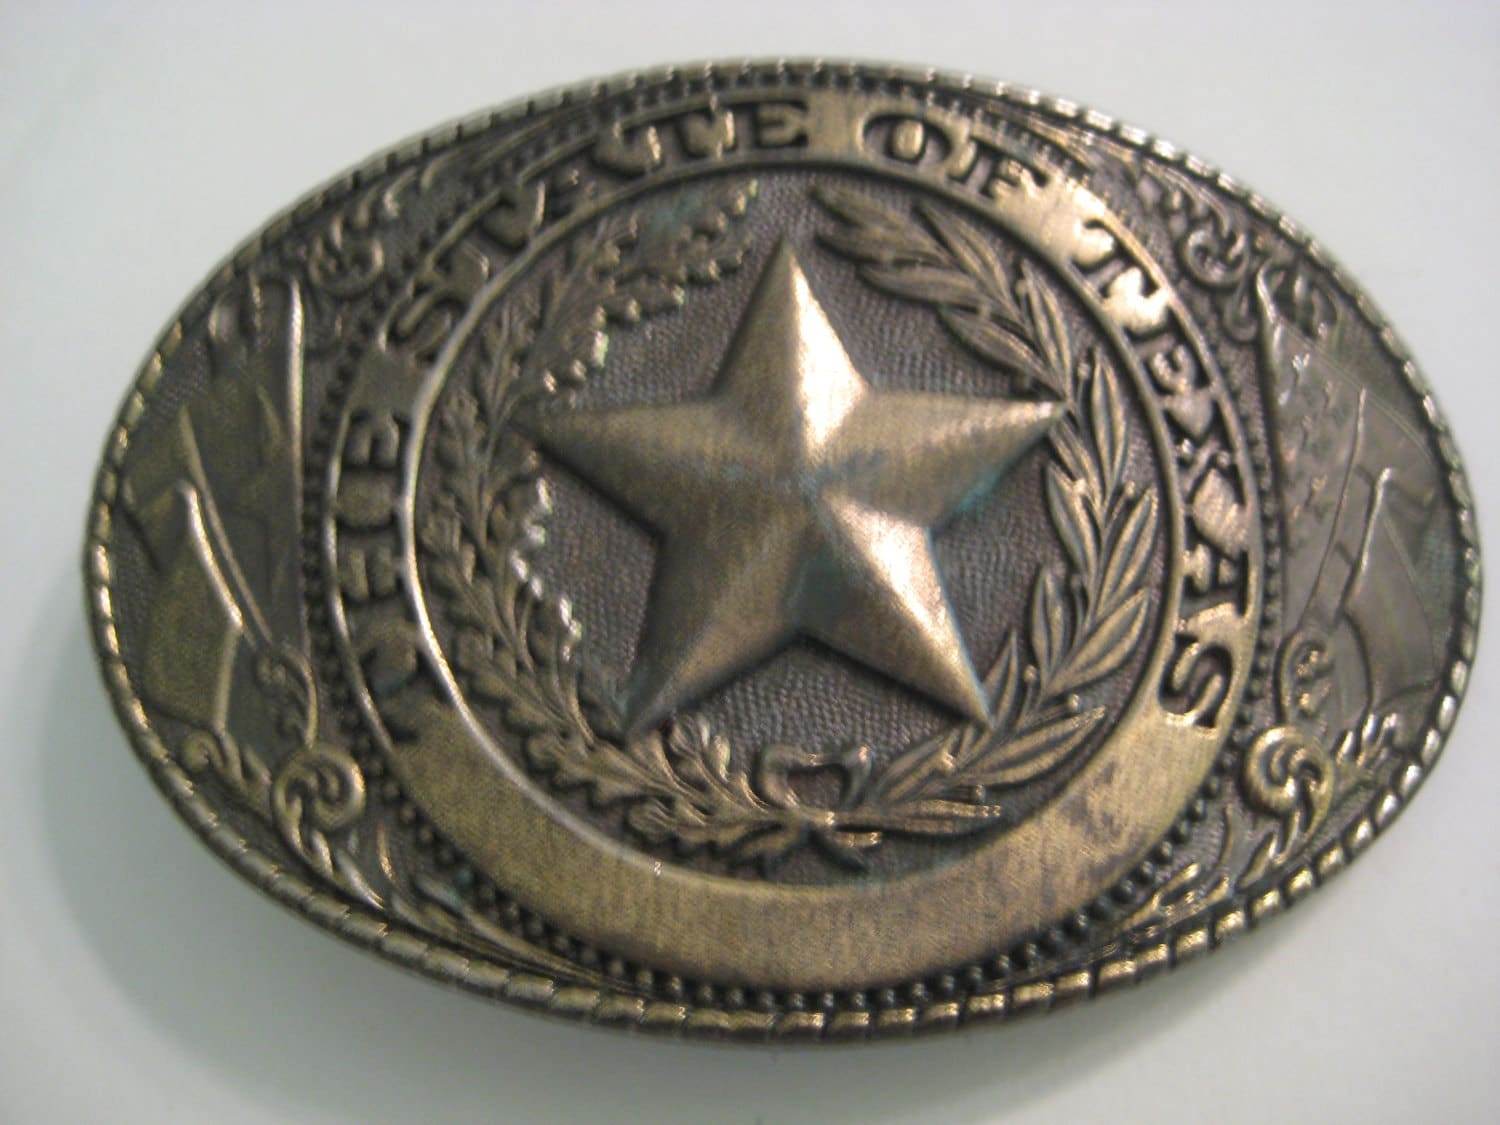 Vintage Solid Brass Belt Buckle State of Texas